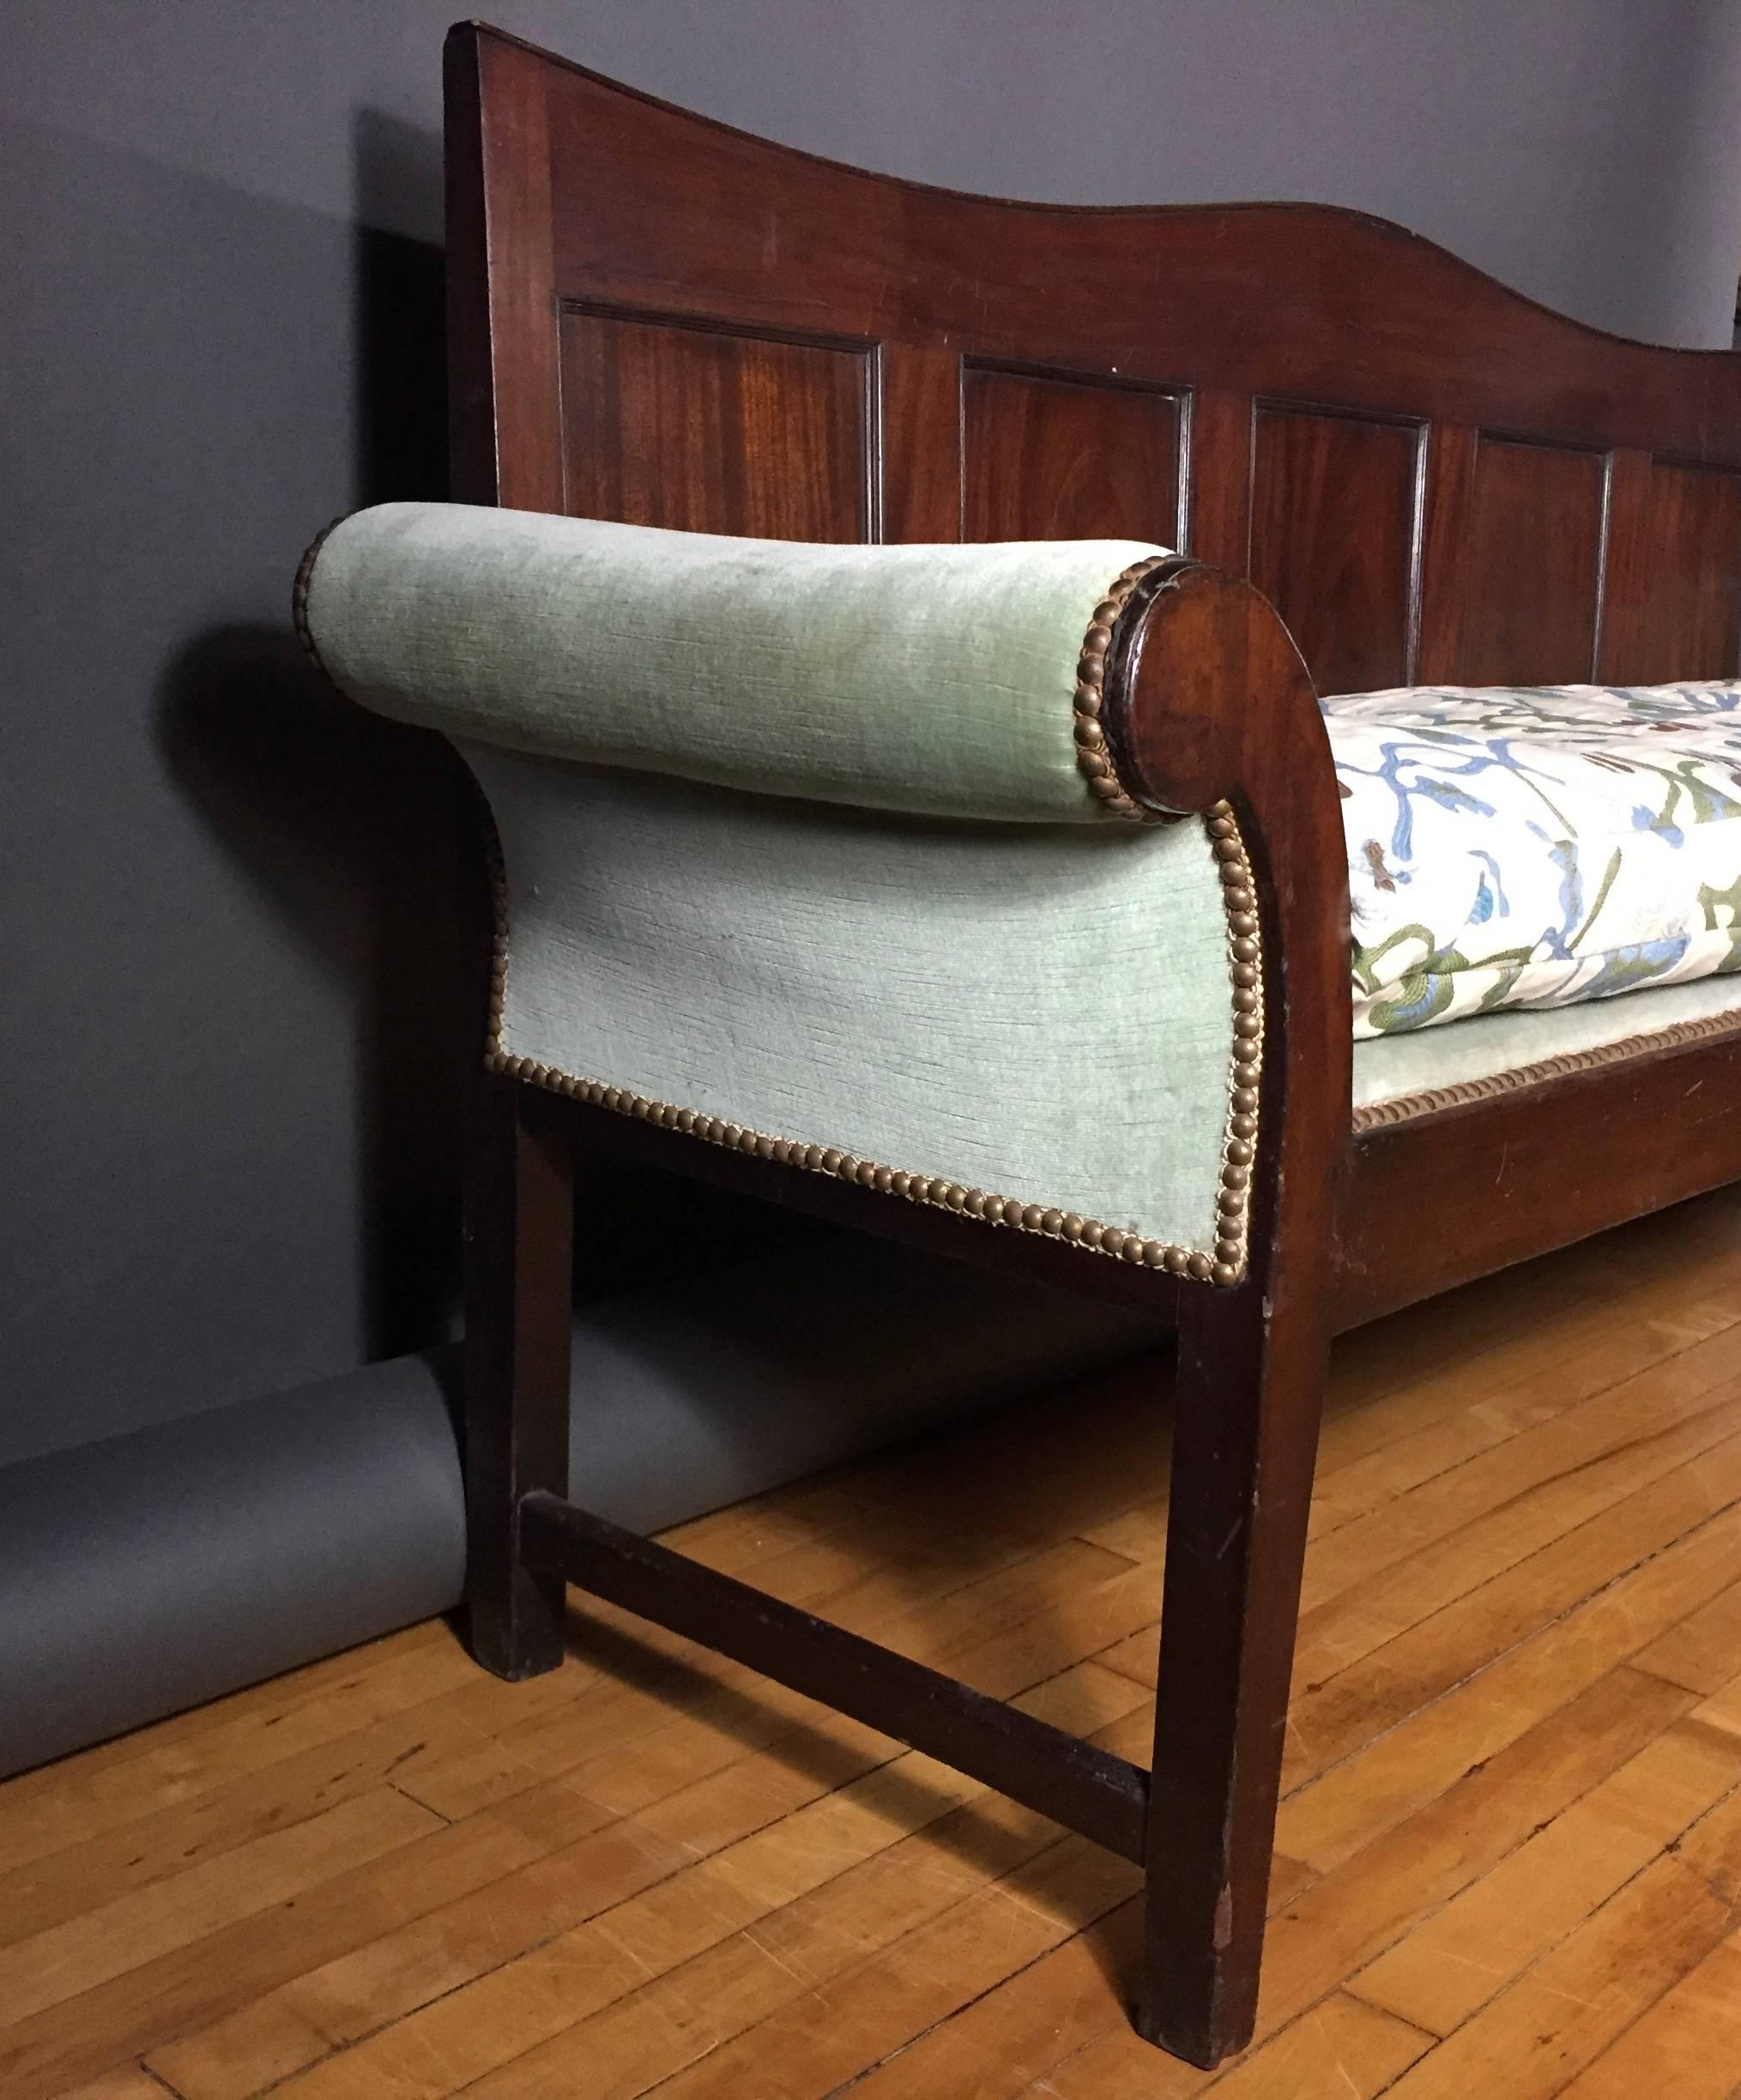 A wonderful hall bench from the late 18th century English Georgian period with panel back and scroll arms. Beautifully embroidered upholstery fabric over down wrapped cushion recently added. Minor re-gluing of panel trim.